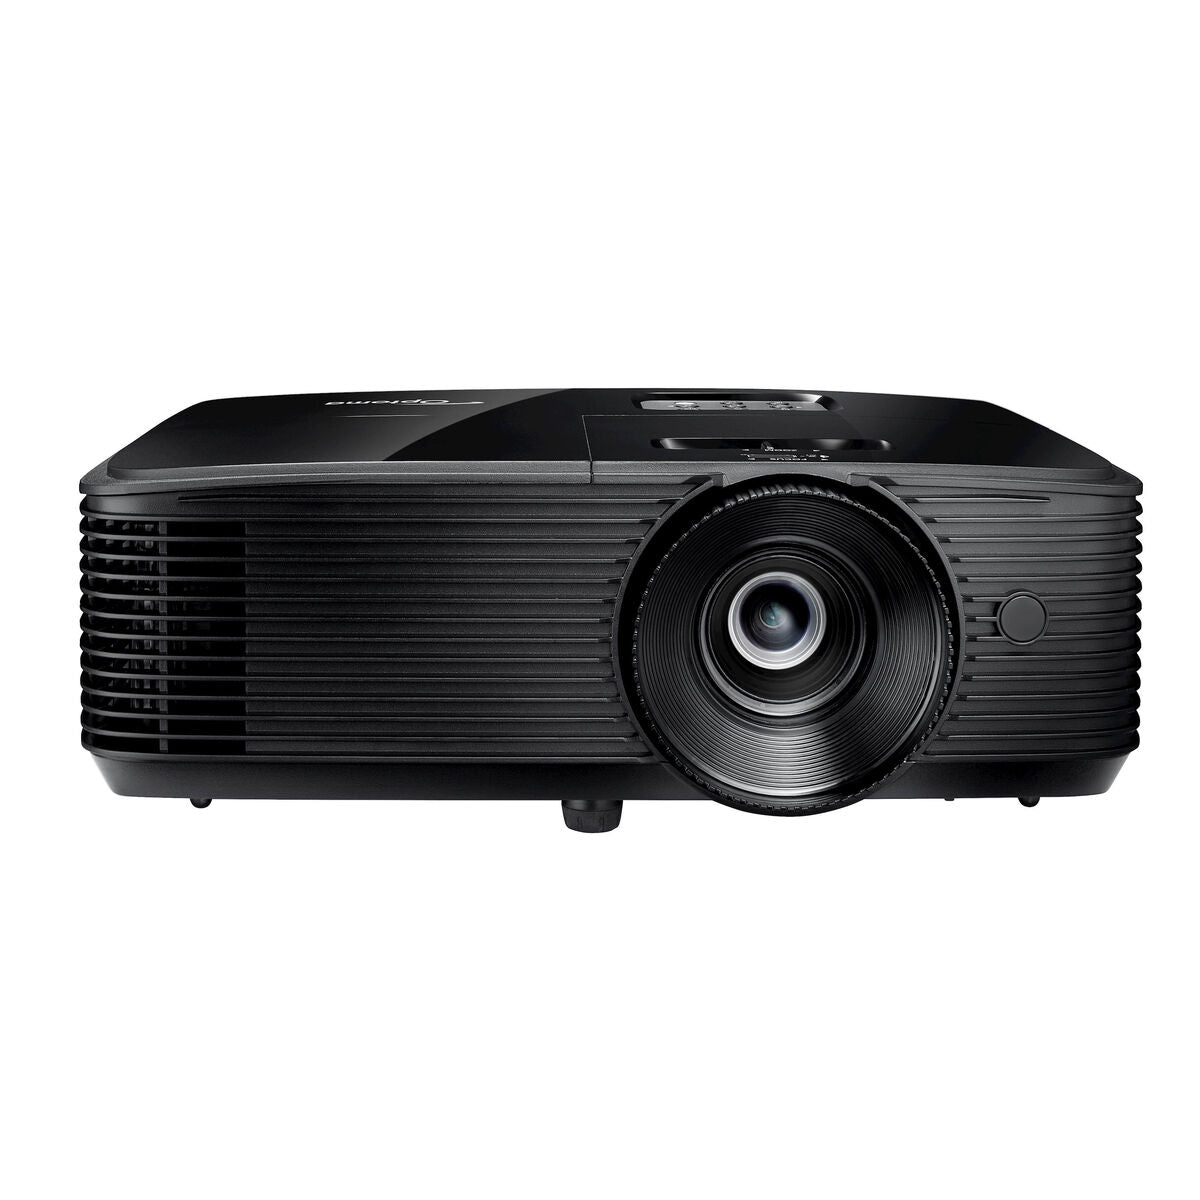 Projector Optoma X400LVE XGA 4000 Lm, Optoma, Electronics, TV, Video and home cinema, projector-optoma-x400lve-xga-4000-lm, Brand_Optoma, category-reference-2609, category-reference-2642, category-reference-2947, category-reference-t-18805, category-reference-t-19653, cinema and television, computers / peripherals, Condition_NEW, entertainment, office, Price_300 - 400, RiotNook